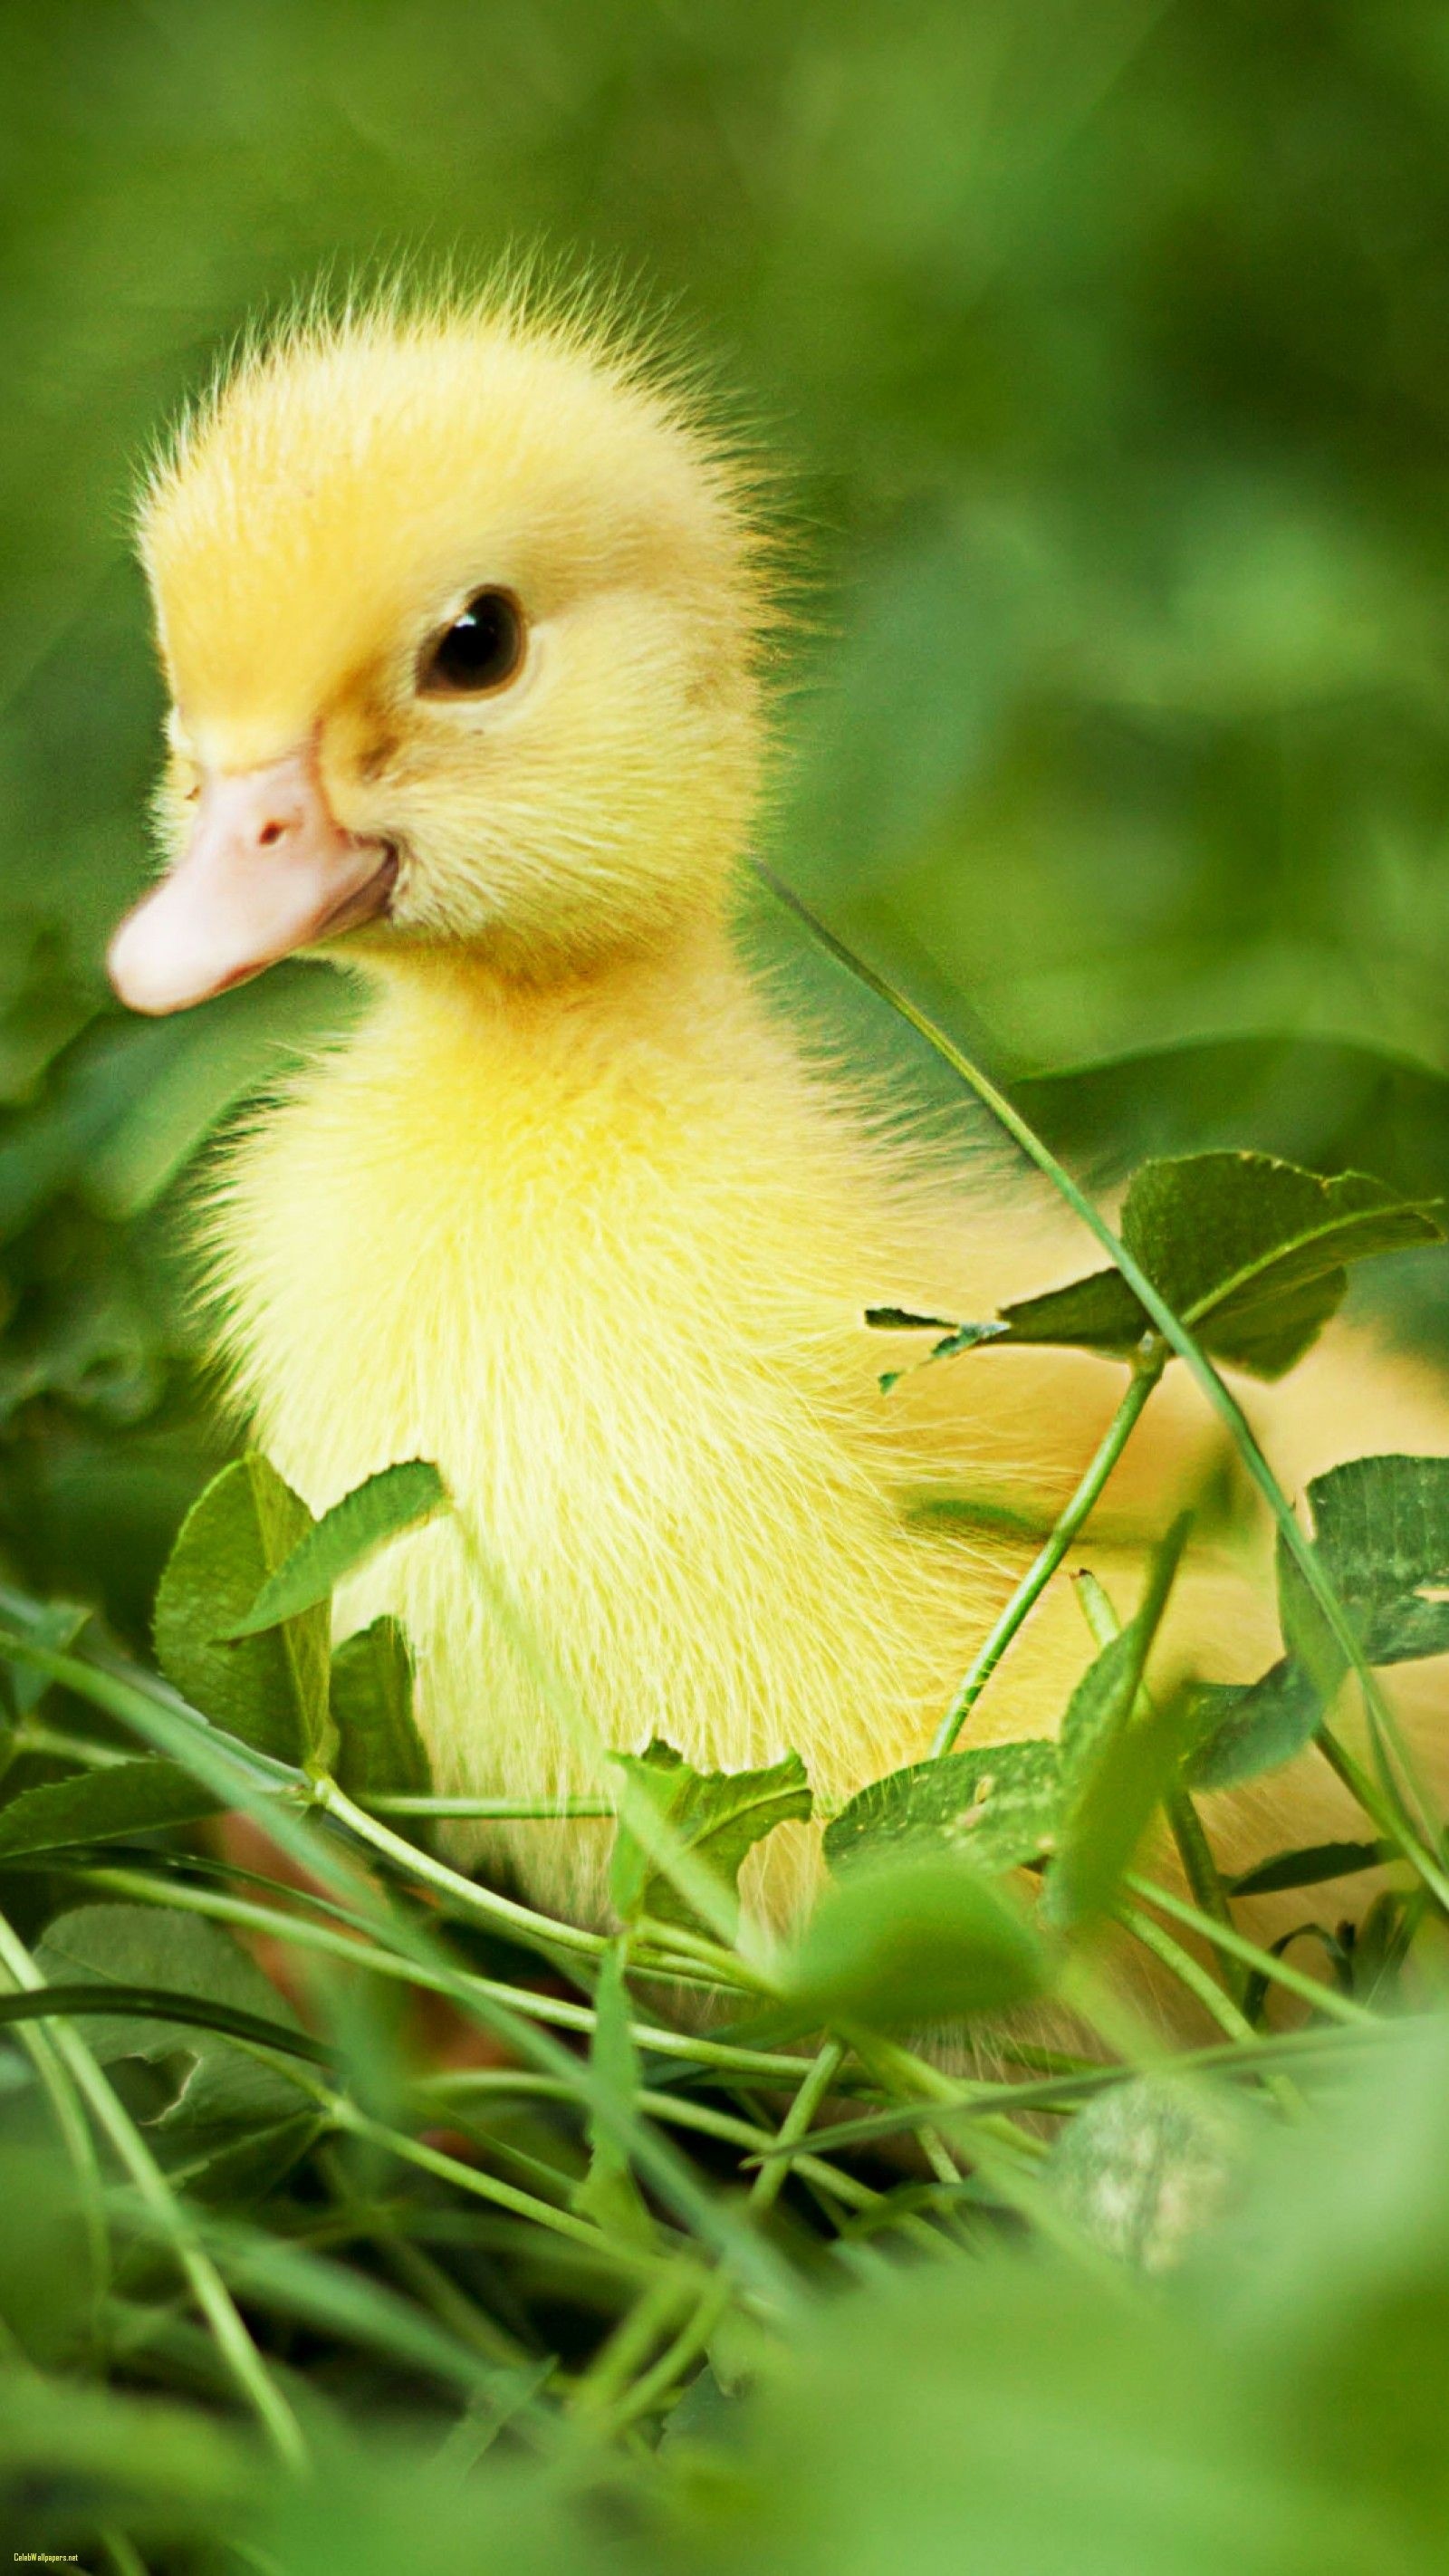 Cute duck wallpapers, Most popular, Adorable backgrounds, Irresistible charm, 1600x2850 HD Handy